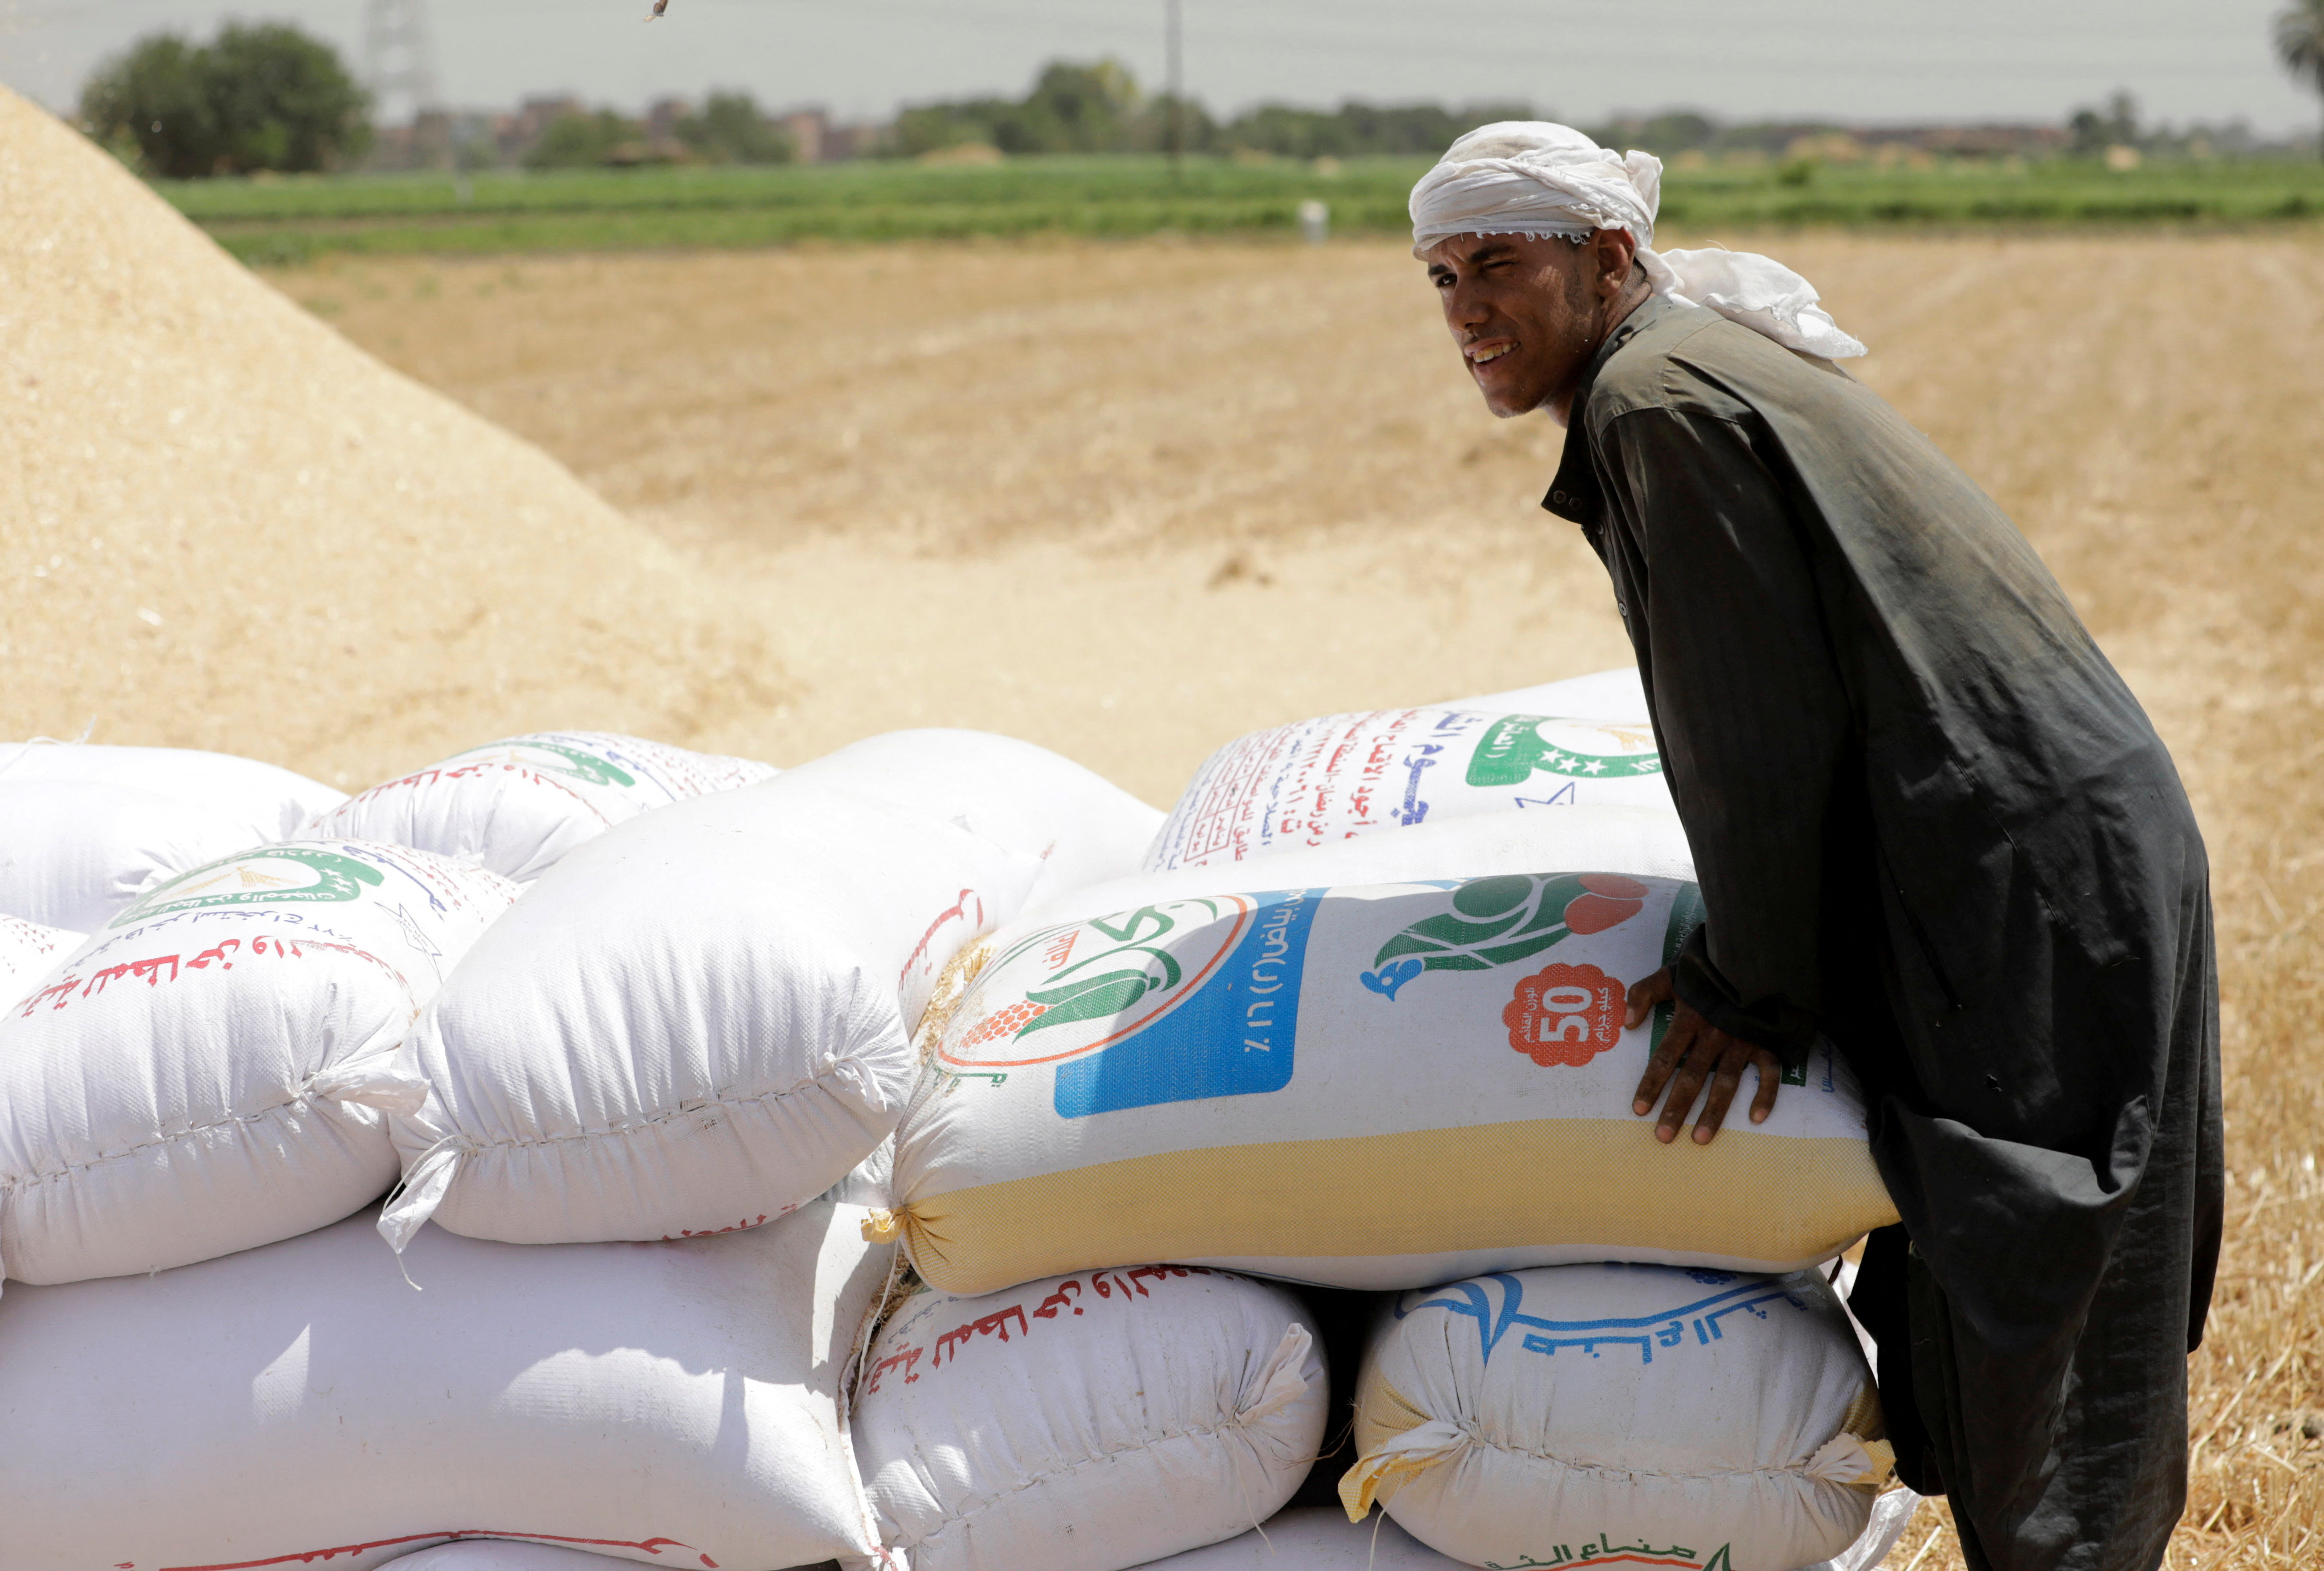 A farmer carries a sack of wheat after harvesting it from a field in Al Qalyubia Governorate